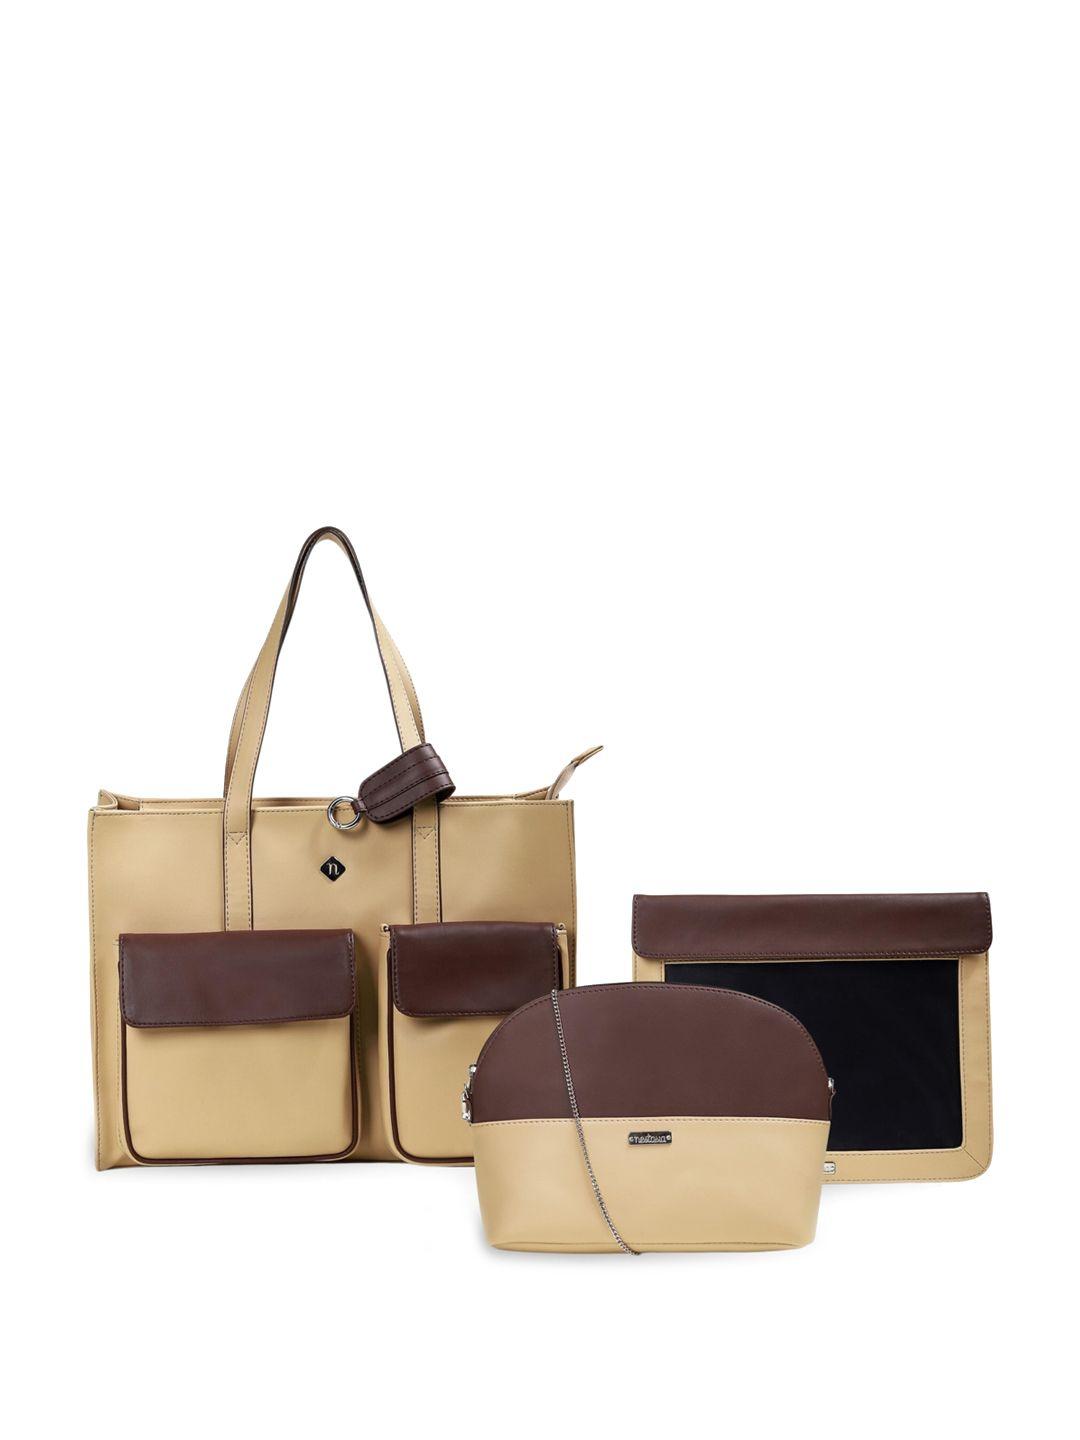 nestasia beige colourblocked structured handheld bag with bow detail